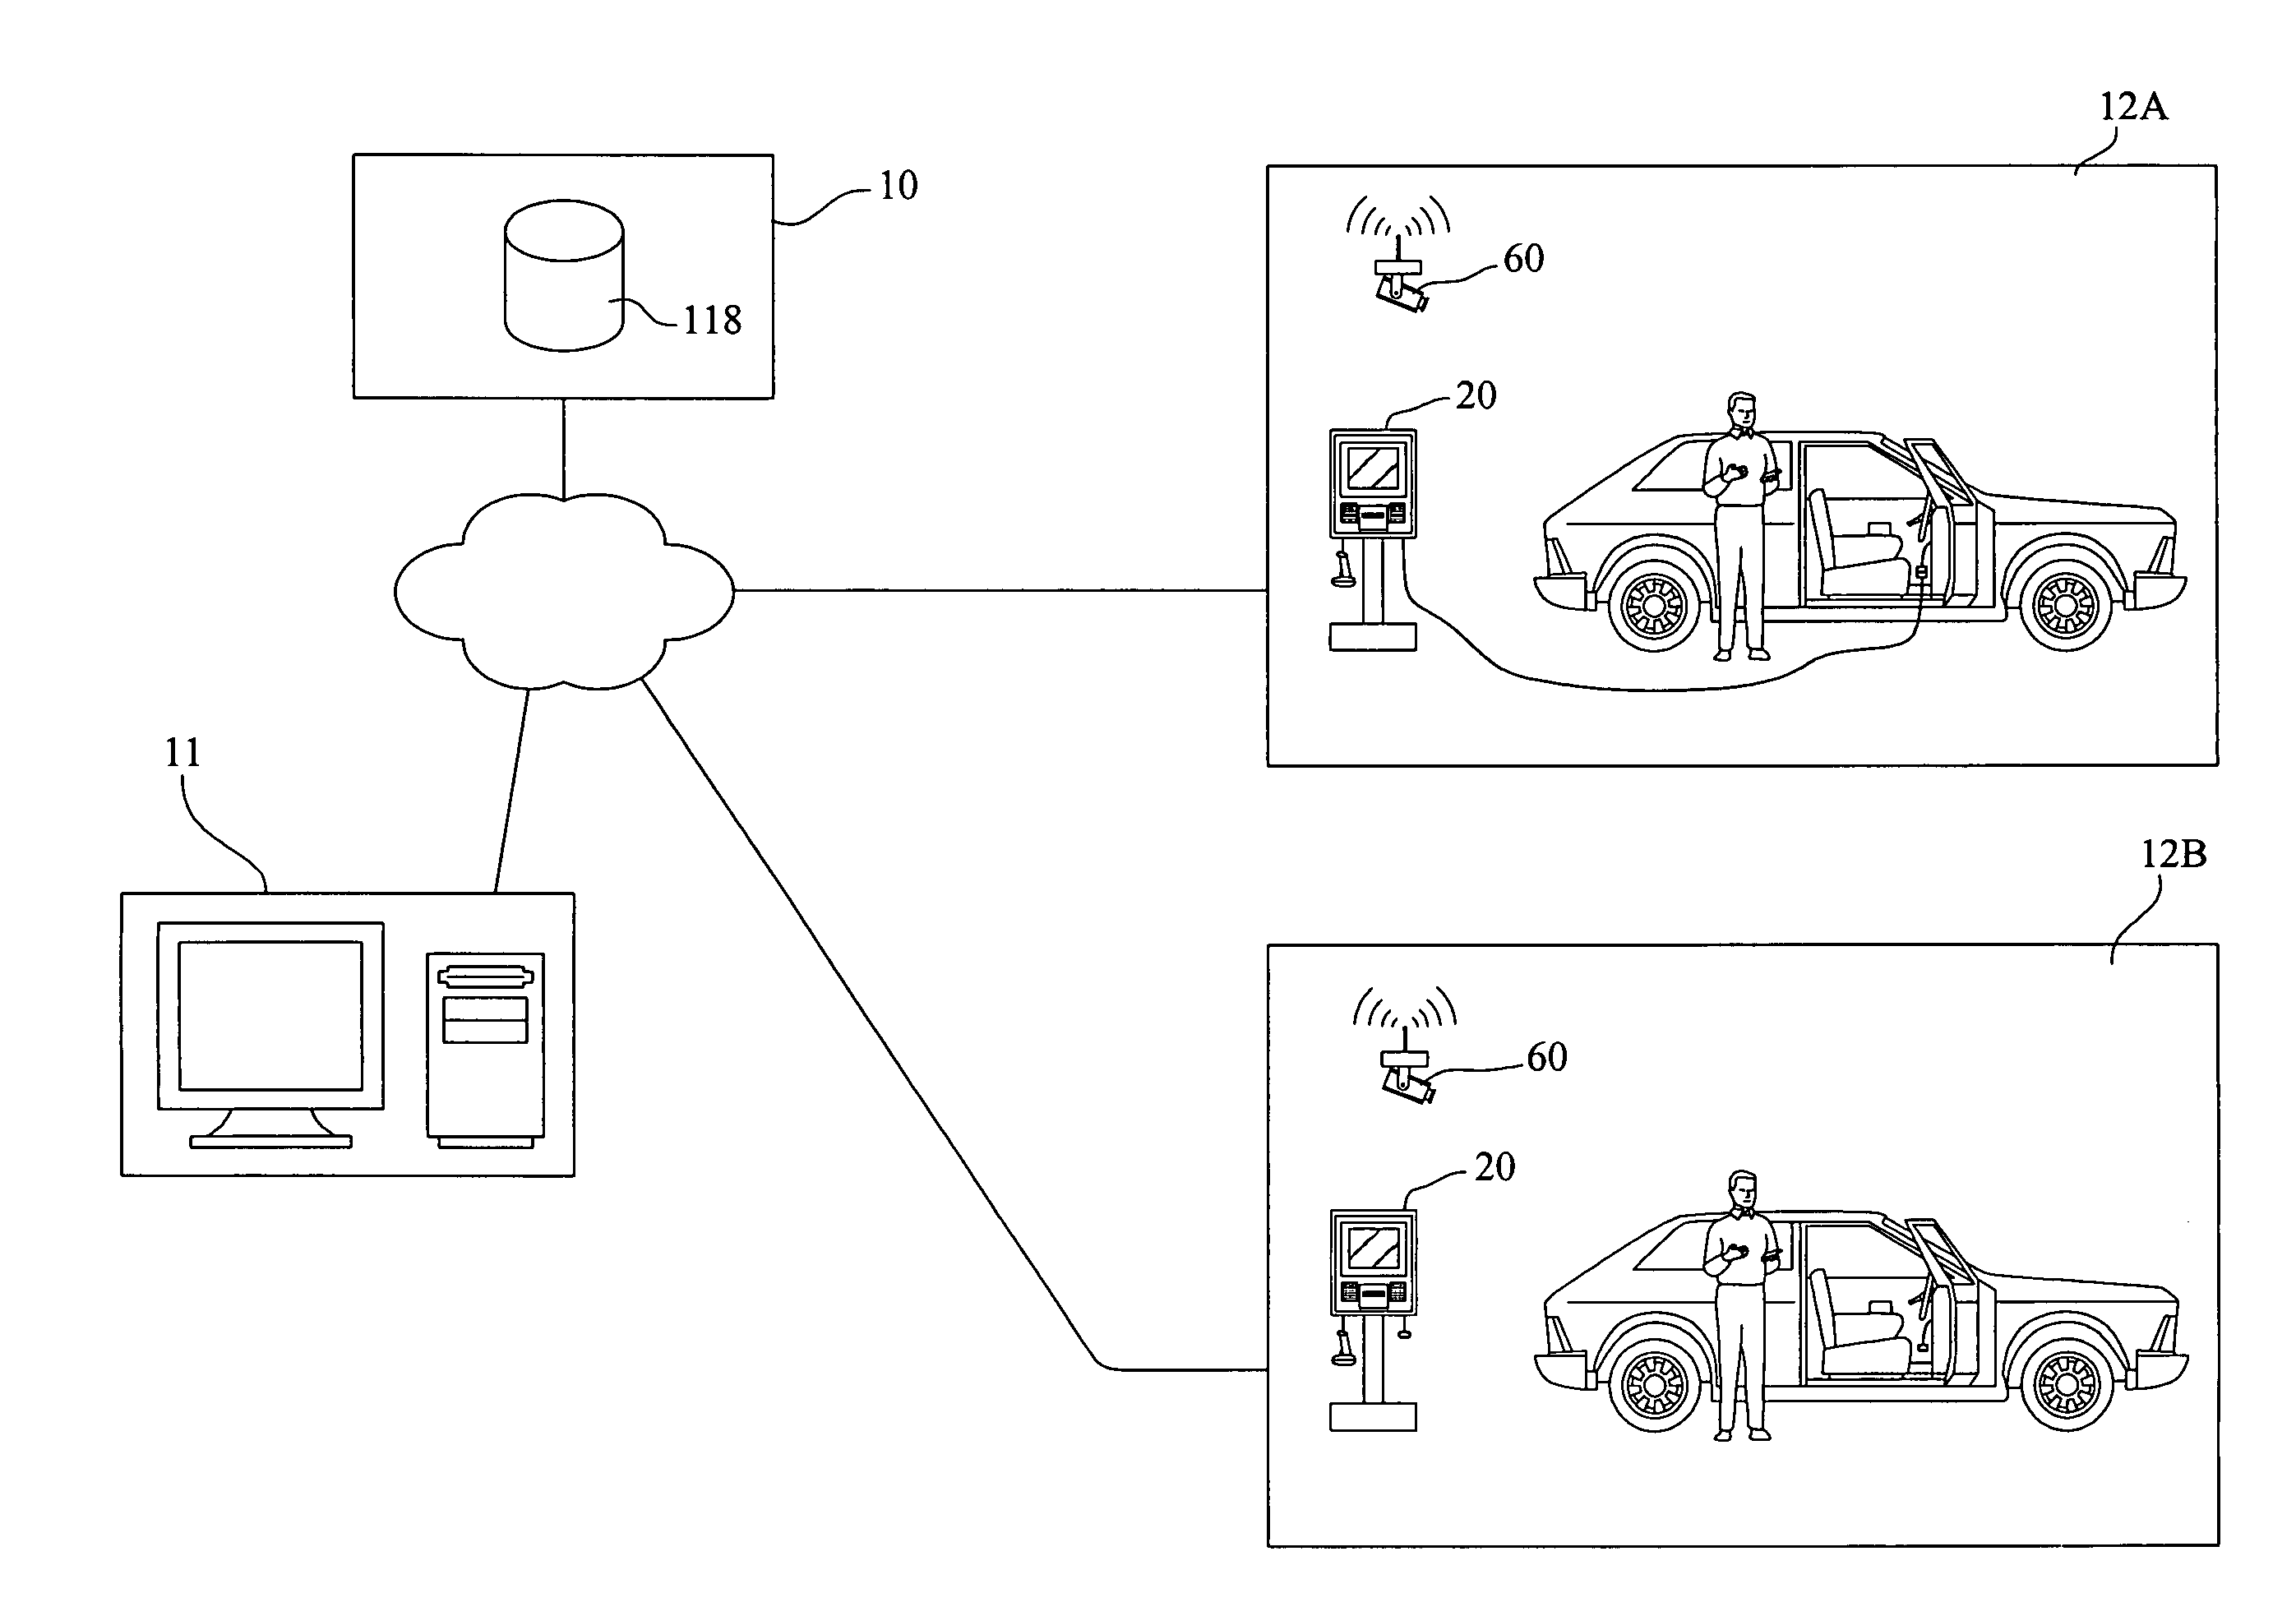 Method and system for vehicle emissions testing at a kiosk through on-board diagnostics unit inspection